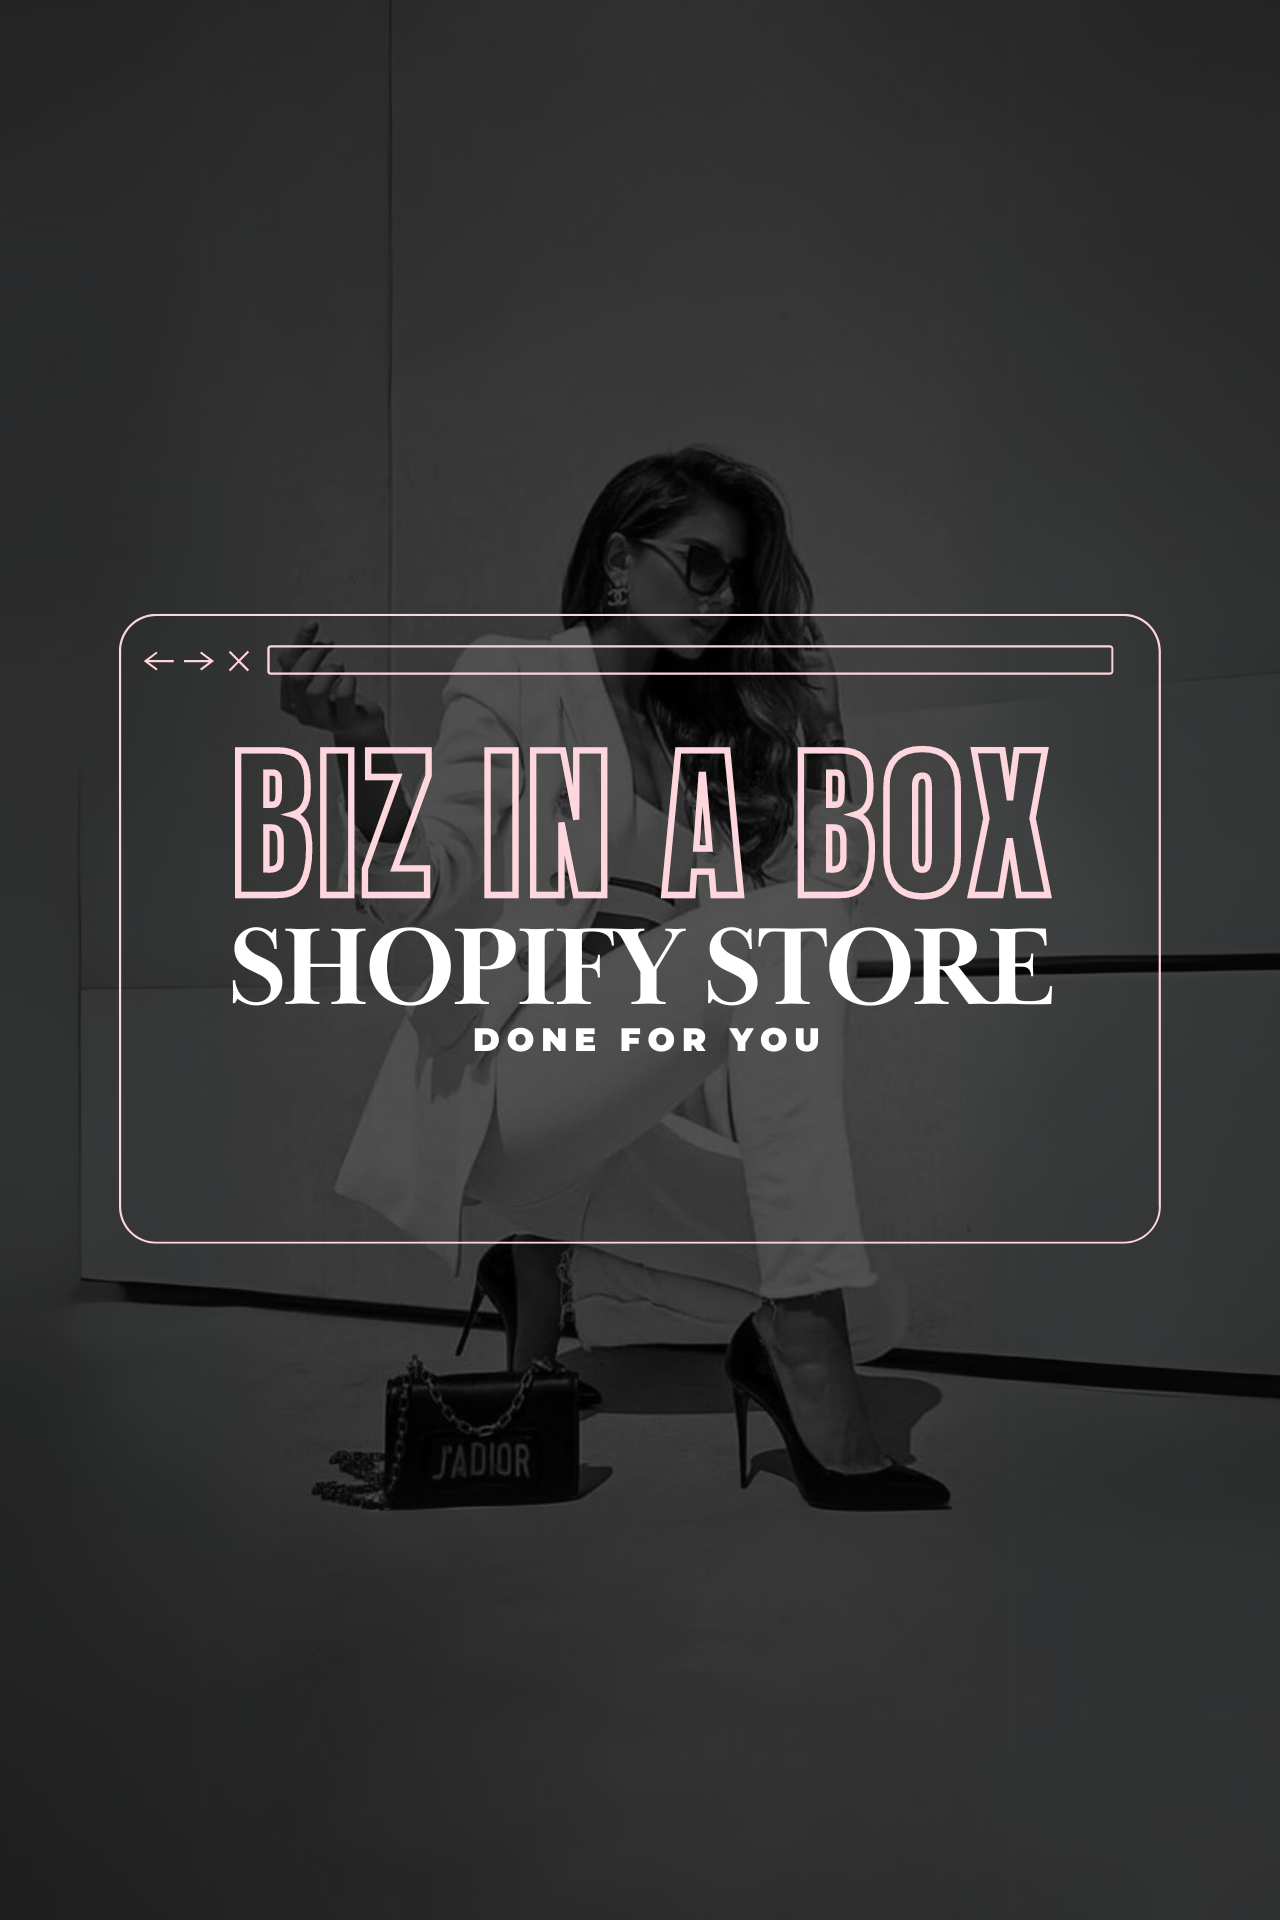 LAUNCH YOUR DREAM SHOPIFY STORE - DONE-FOR-YOU STORES FOR DIGITAL PRODUCTS